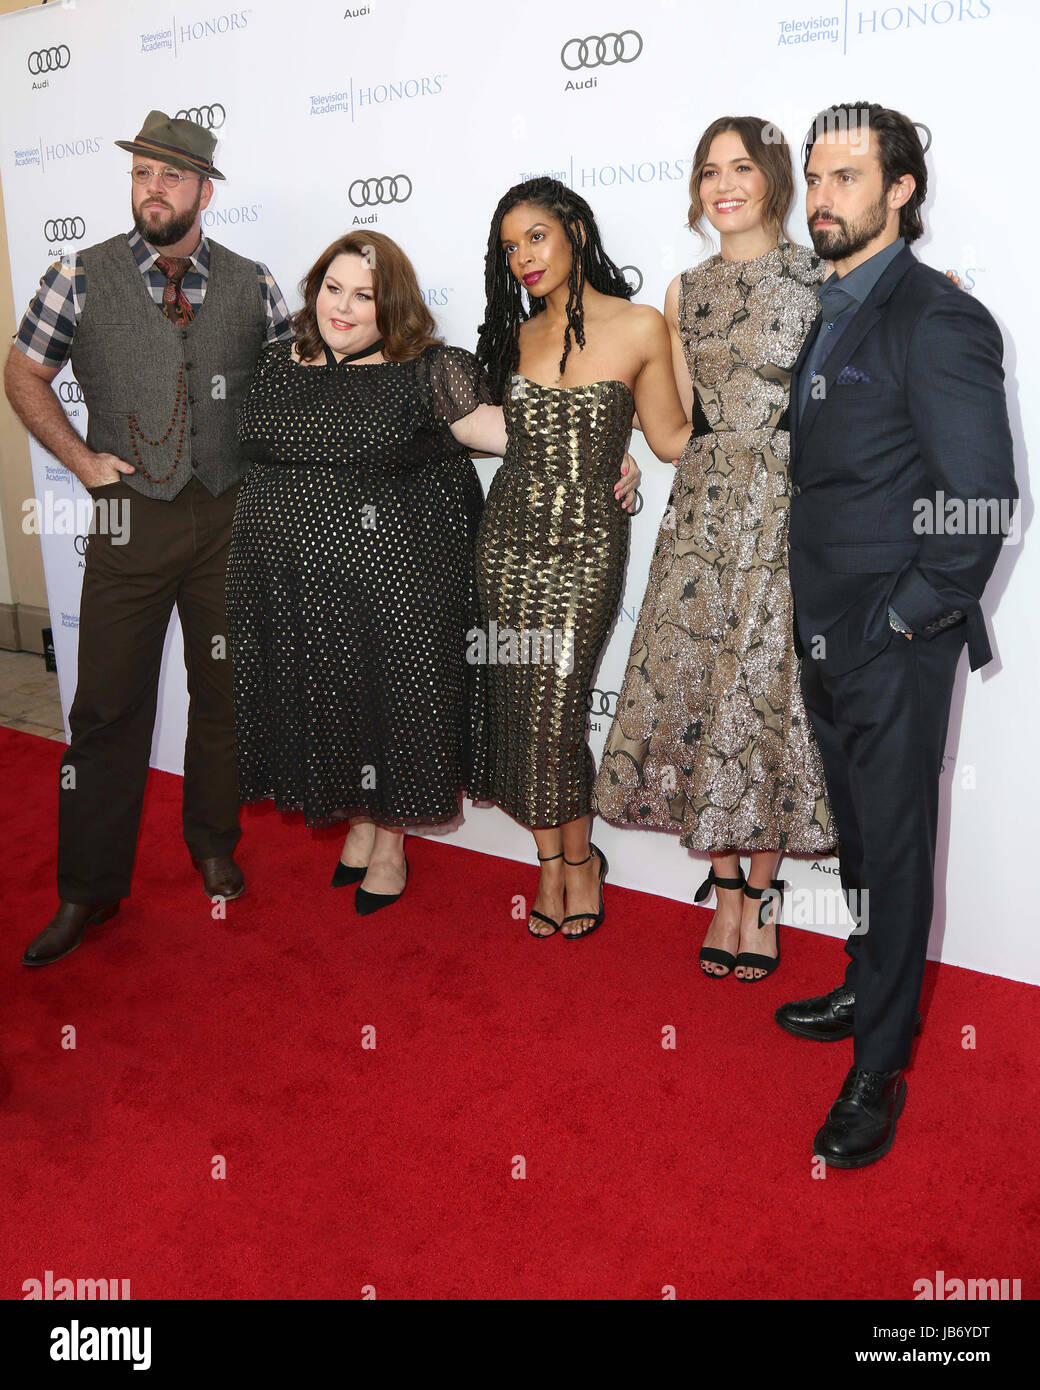 Beverly Hills, CA, USA. 8th June, 2017. LOS ANGELES - JUN 8: Chris Sullivan, Chrissy Metz, Susan Kelechi Watson, Mandy Moore, Milo Ventimiglia at the 10th Annual Television Academy Honors at the Montage Hotel on June 8, 2017 in Beverly Hills, CA Credit: Kay Blake/ZUMA Wire/Alamy Live News Stock Photo